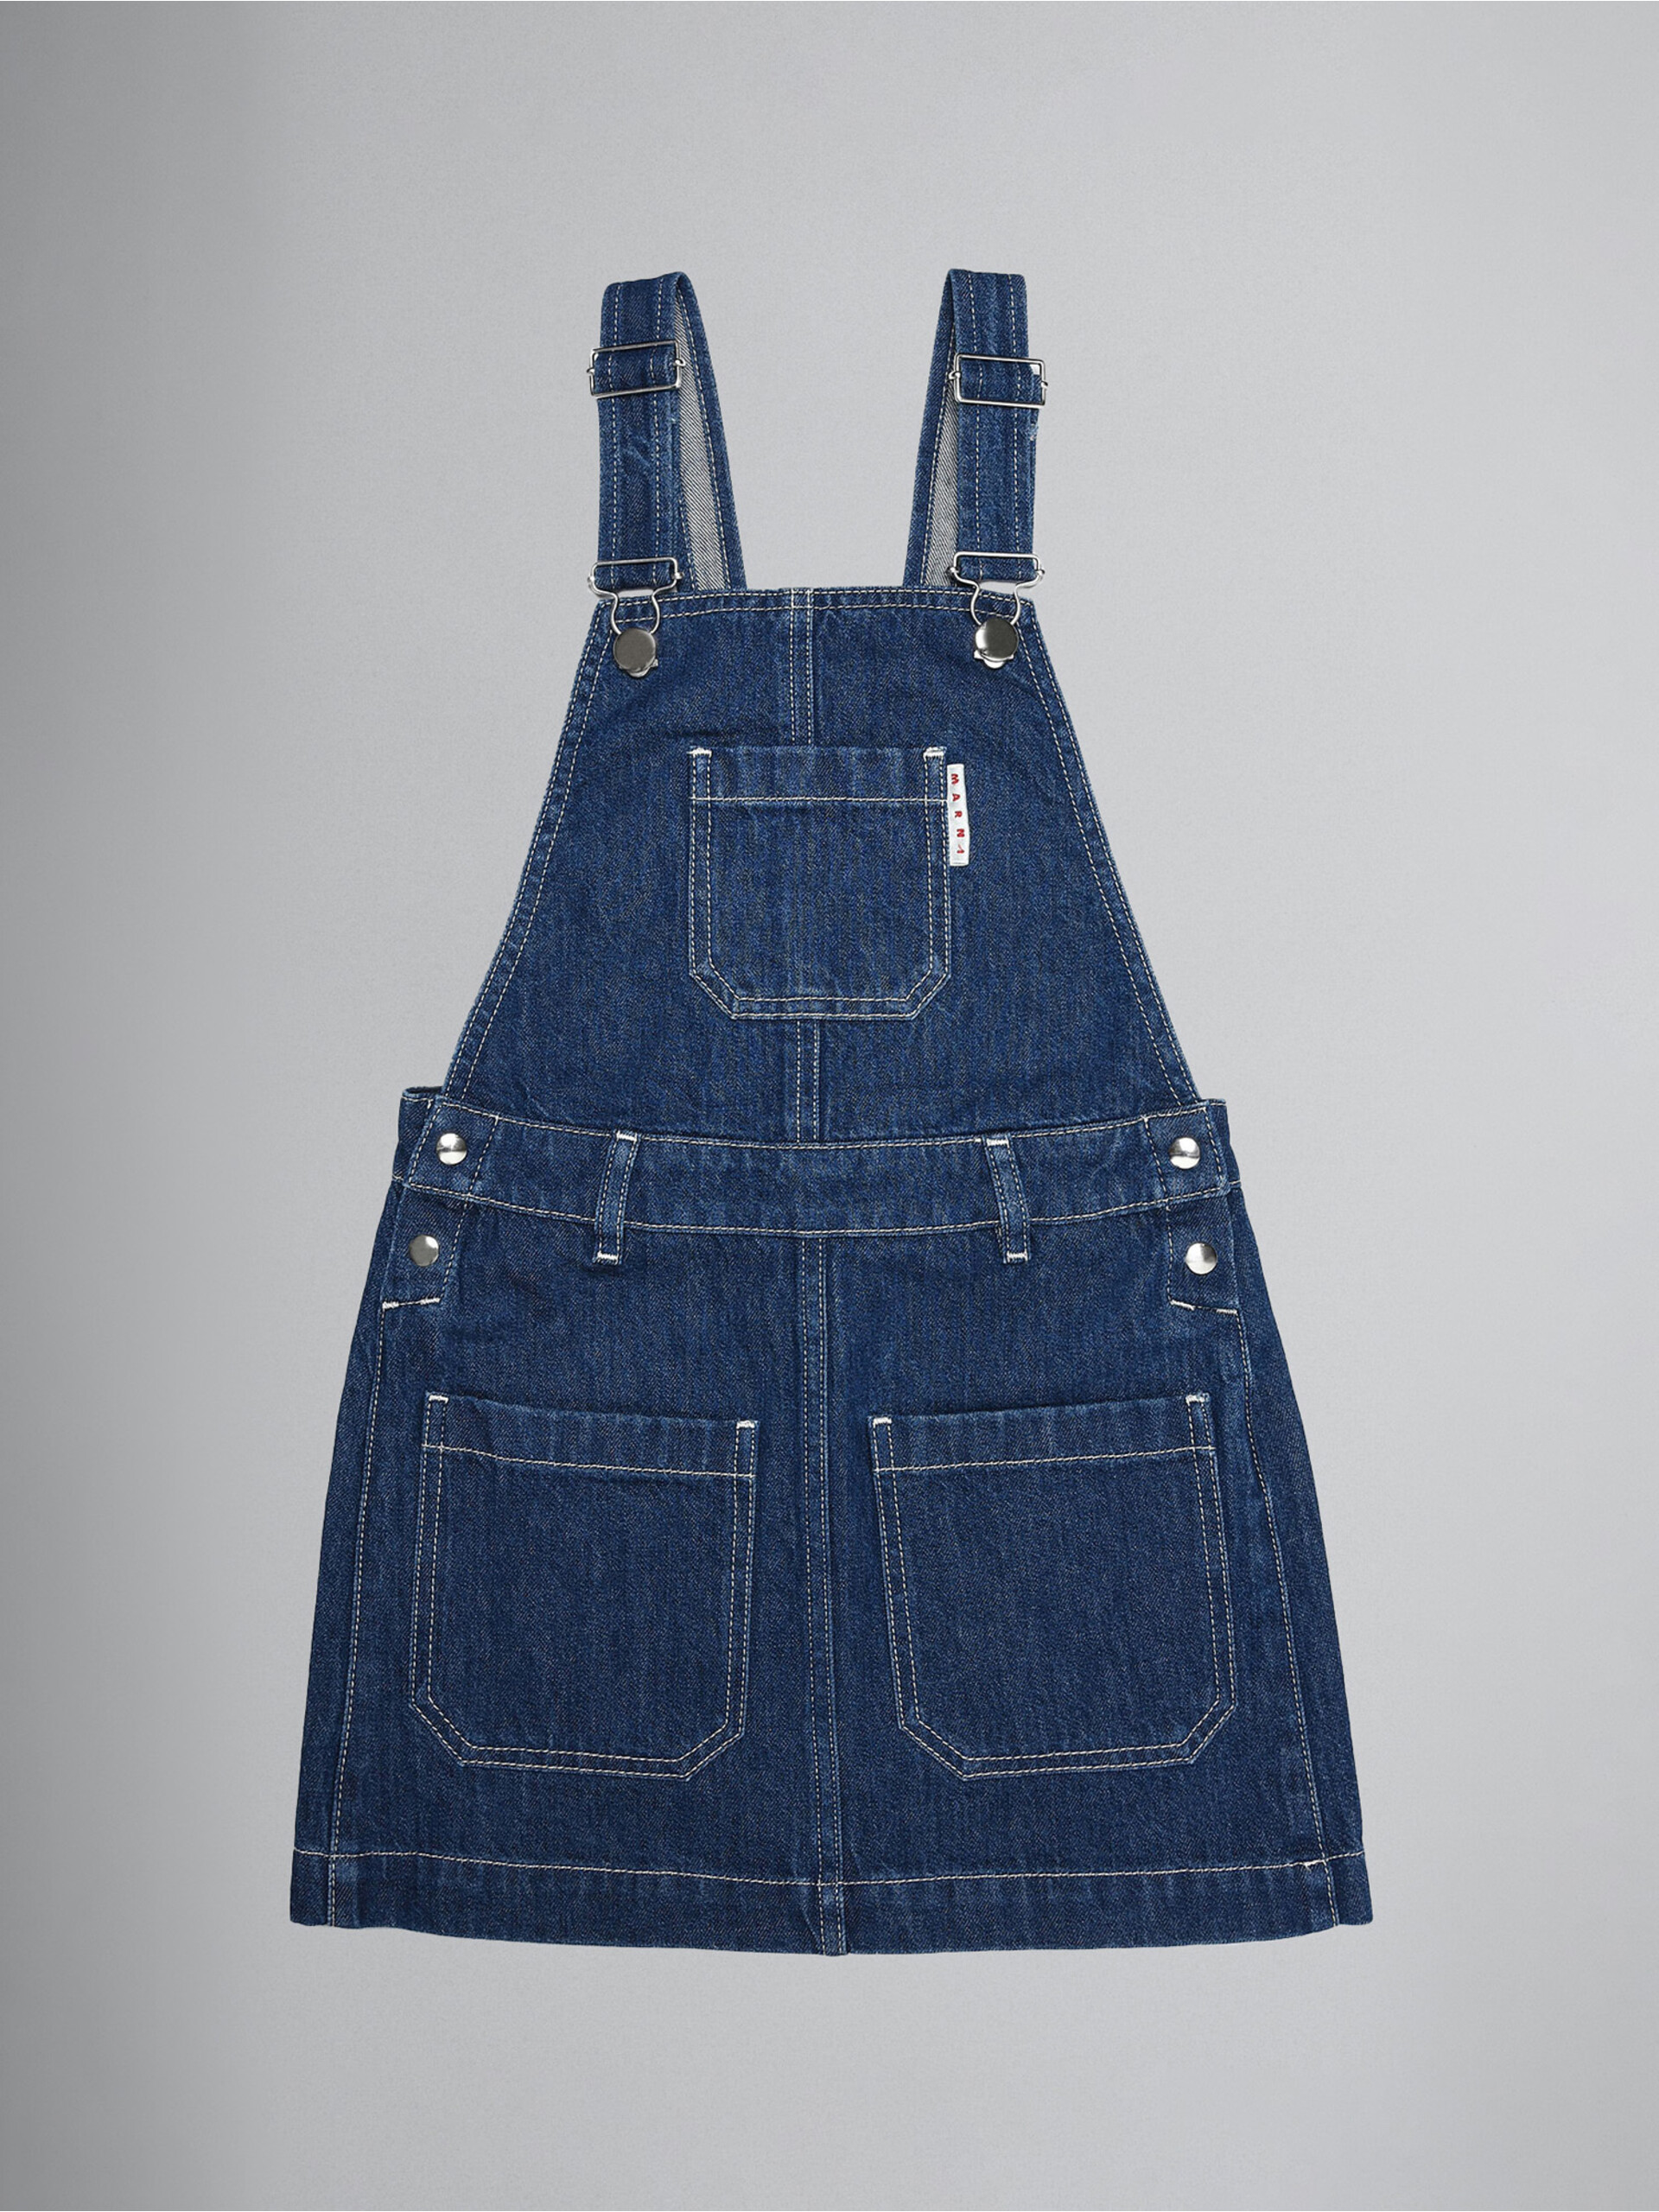 Denim pinafore dress with frayed "M" patch - Dresses - Image 1